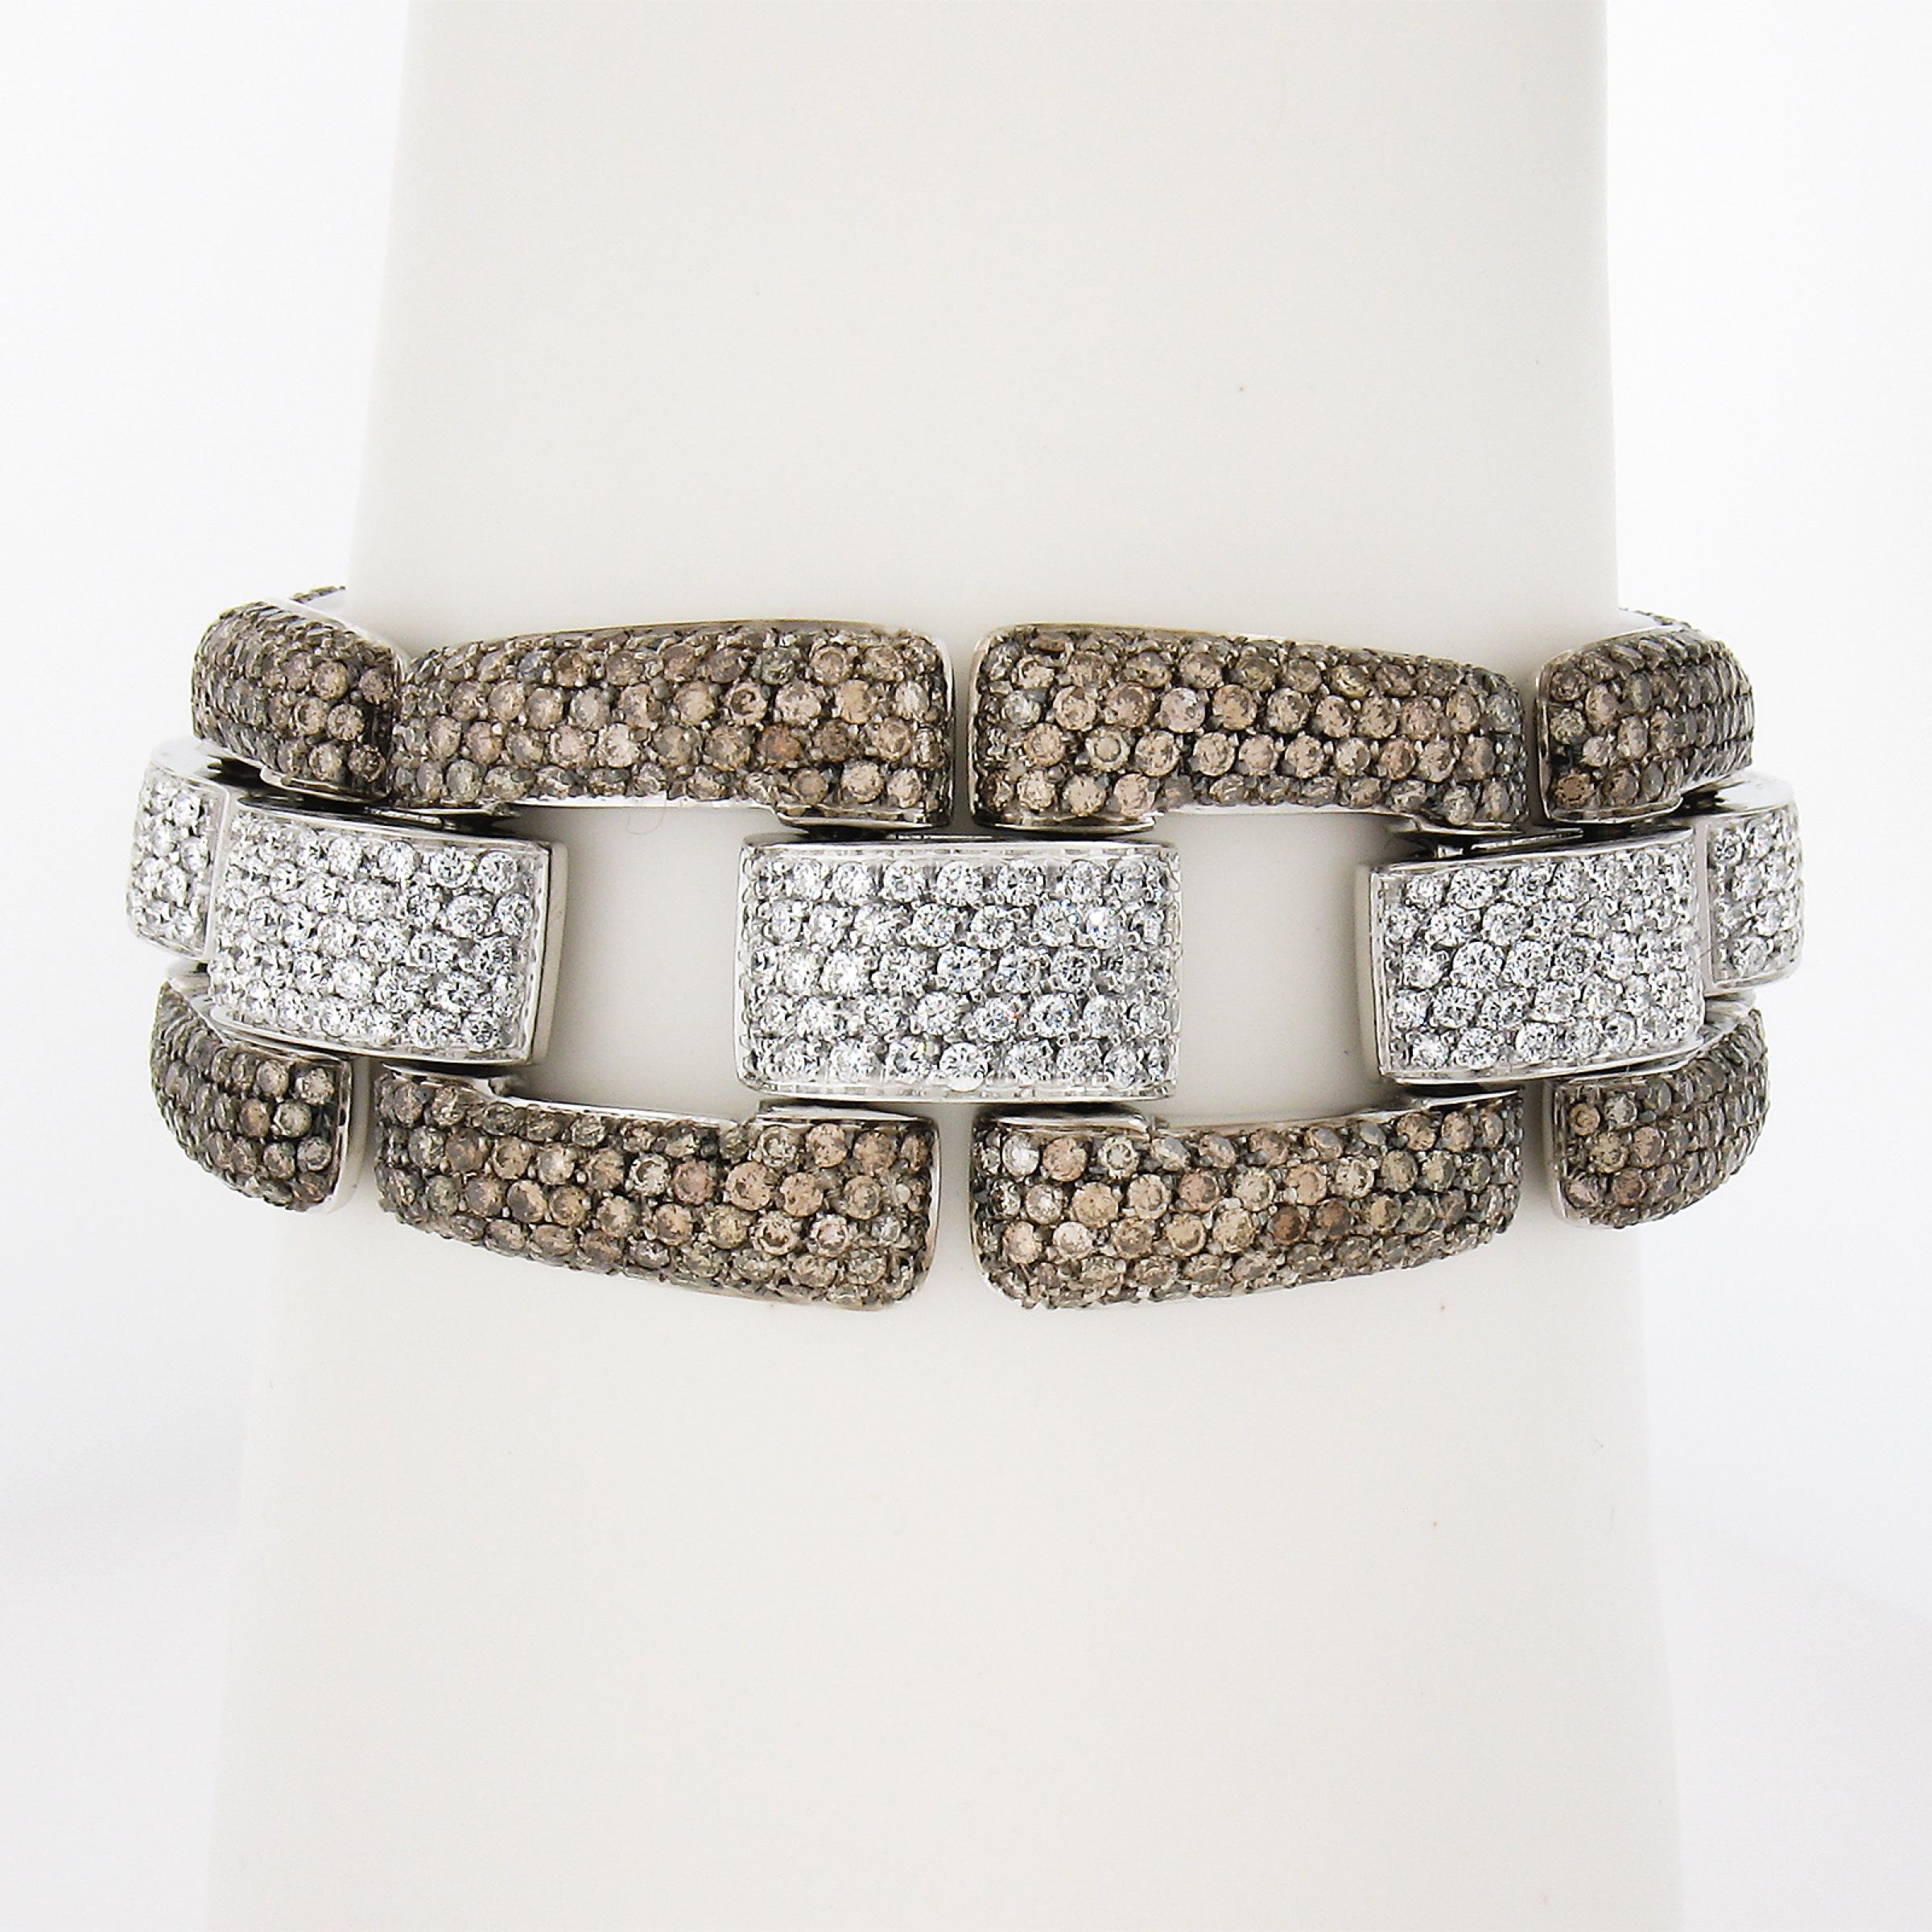 We hear bracelets being drenched in diamonds - this one is LITERALLY drenched in diamonds! Every part of this bracelet is covered in hand set pave round brilliant diamonds. The contrast between the white and fancy colored diamonds along with the